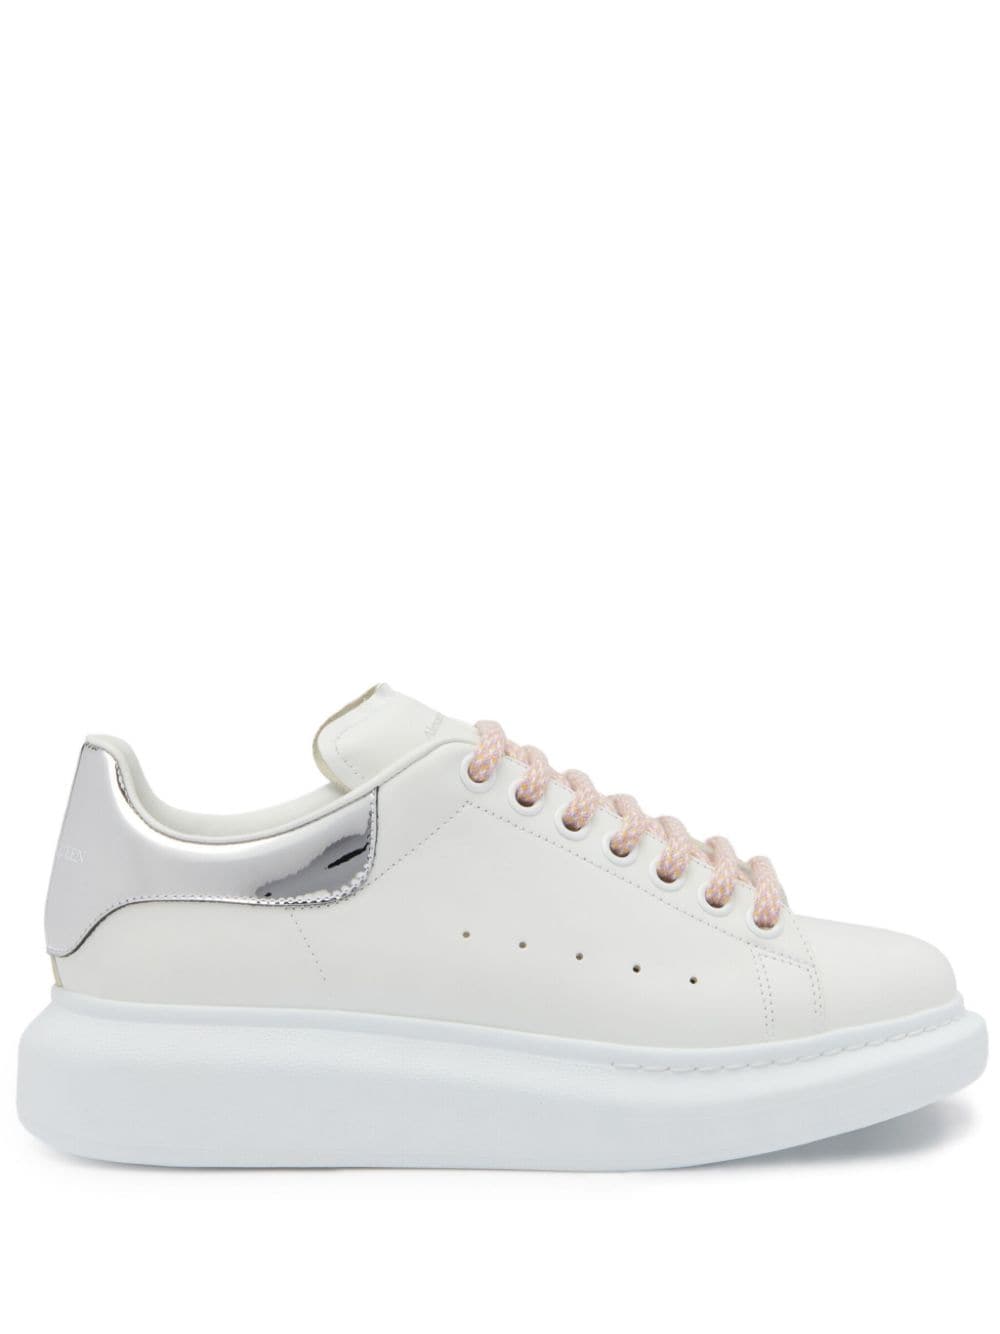 White/silver Oversized leather sneakers<BR/><BR/><BR/>